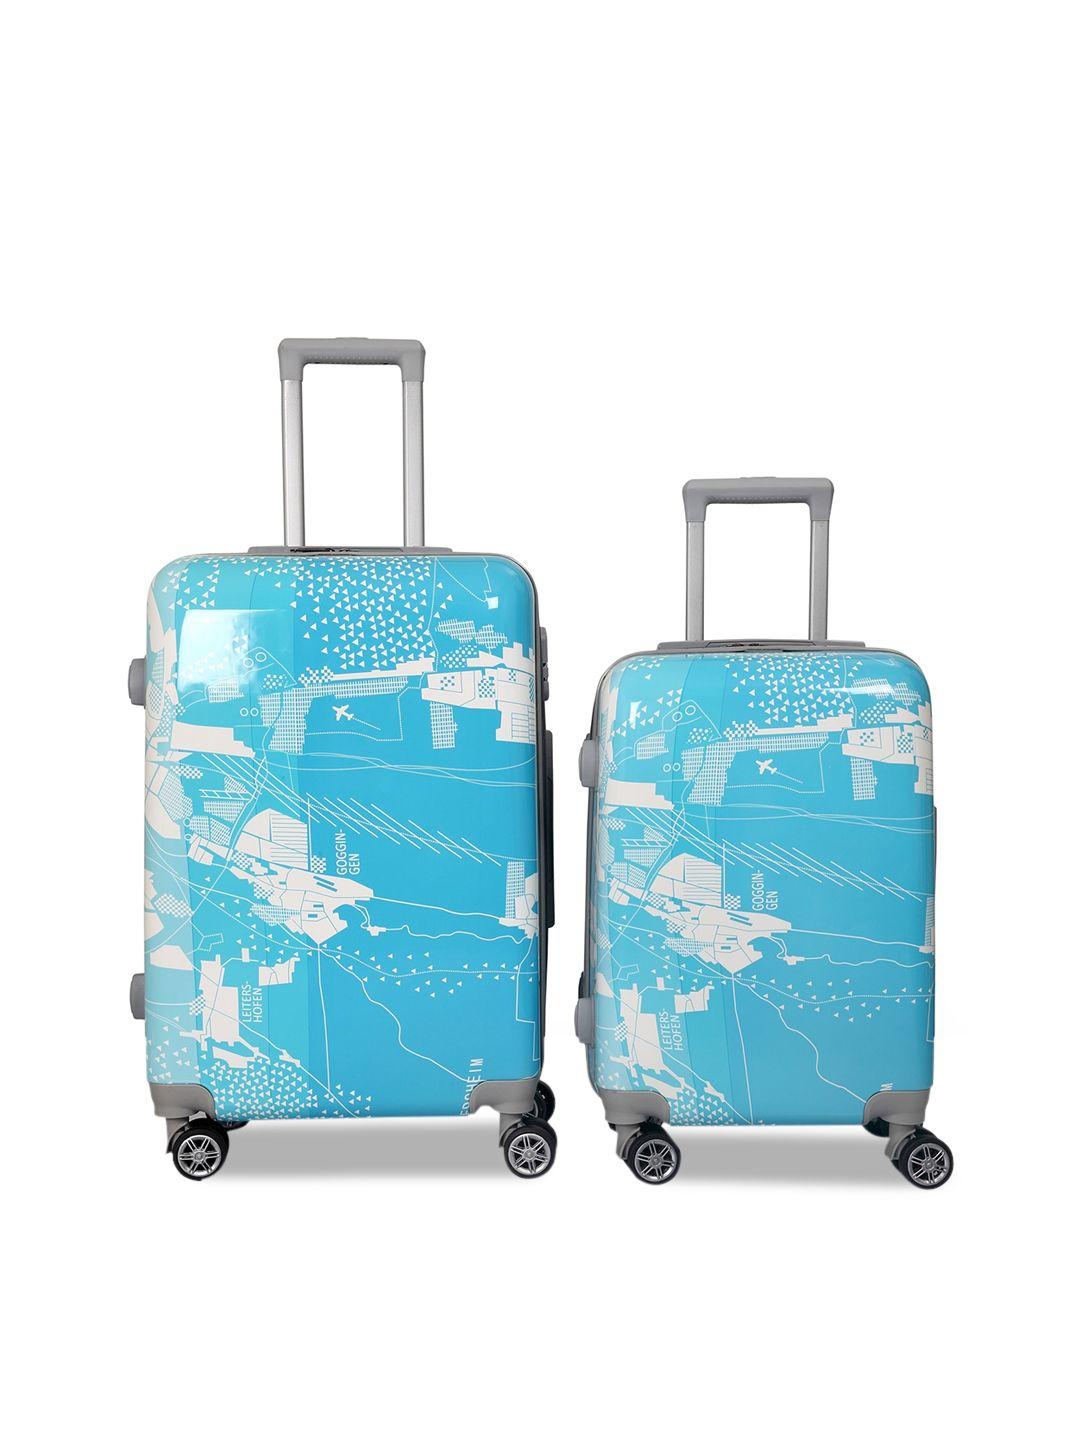 polo class set of 2 hard-sided trolley suitcases